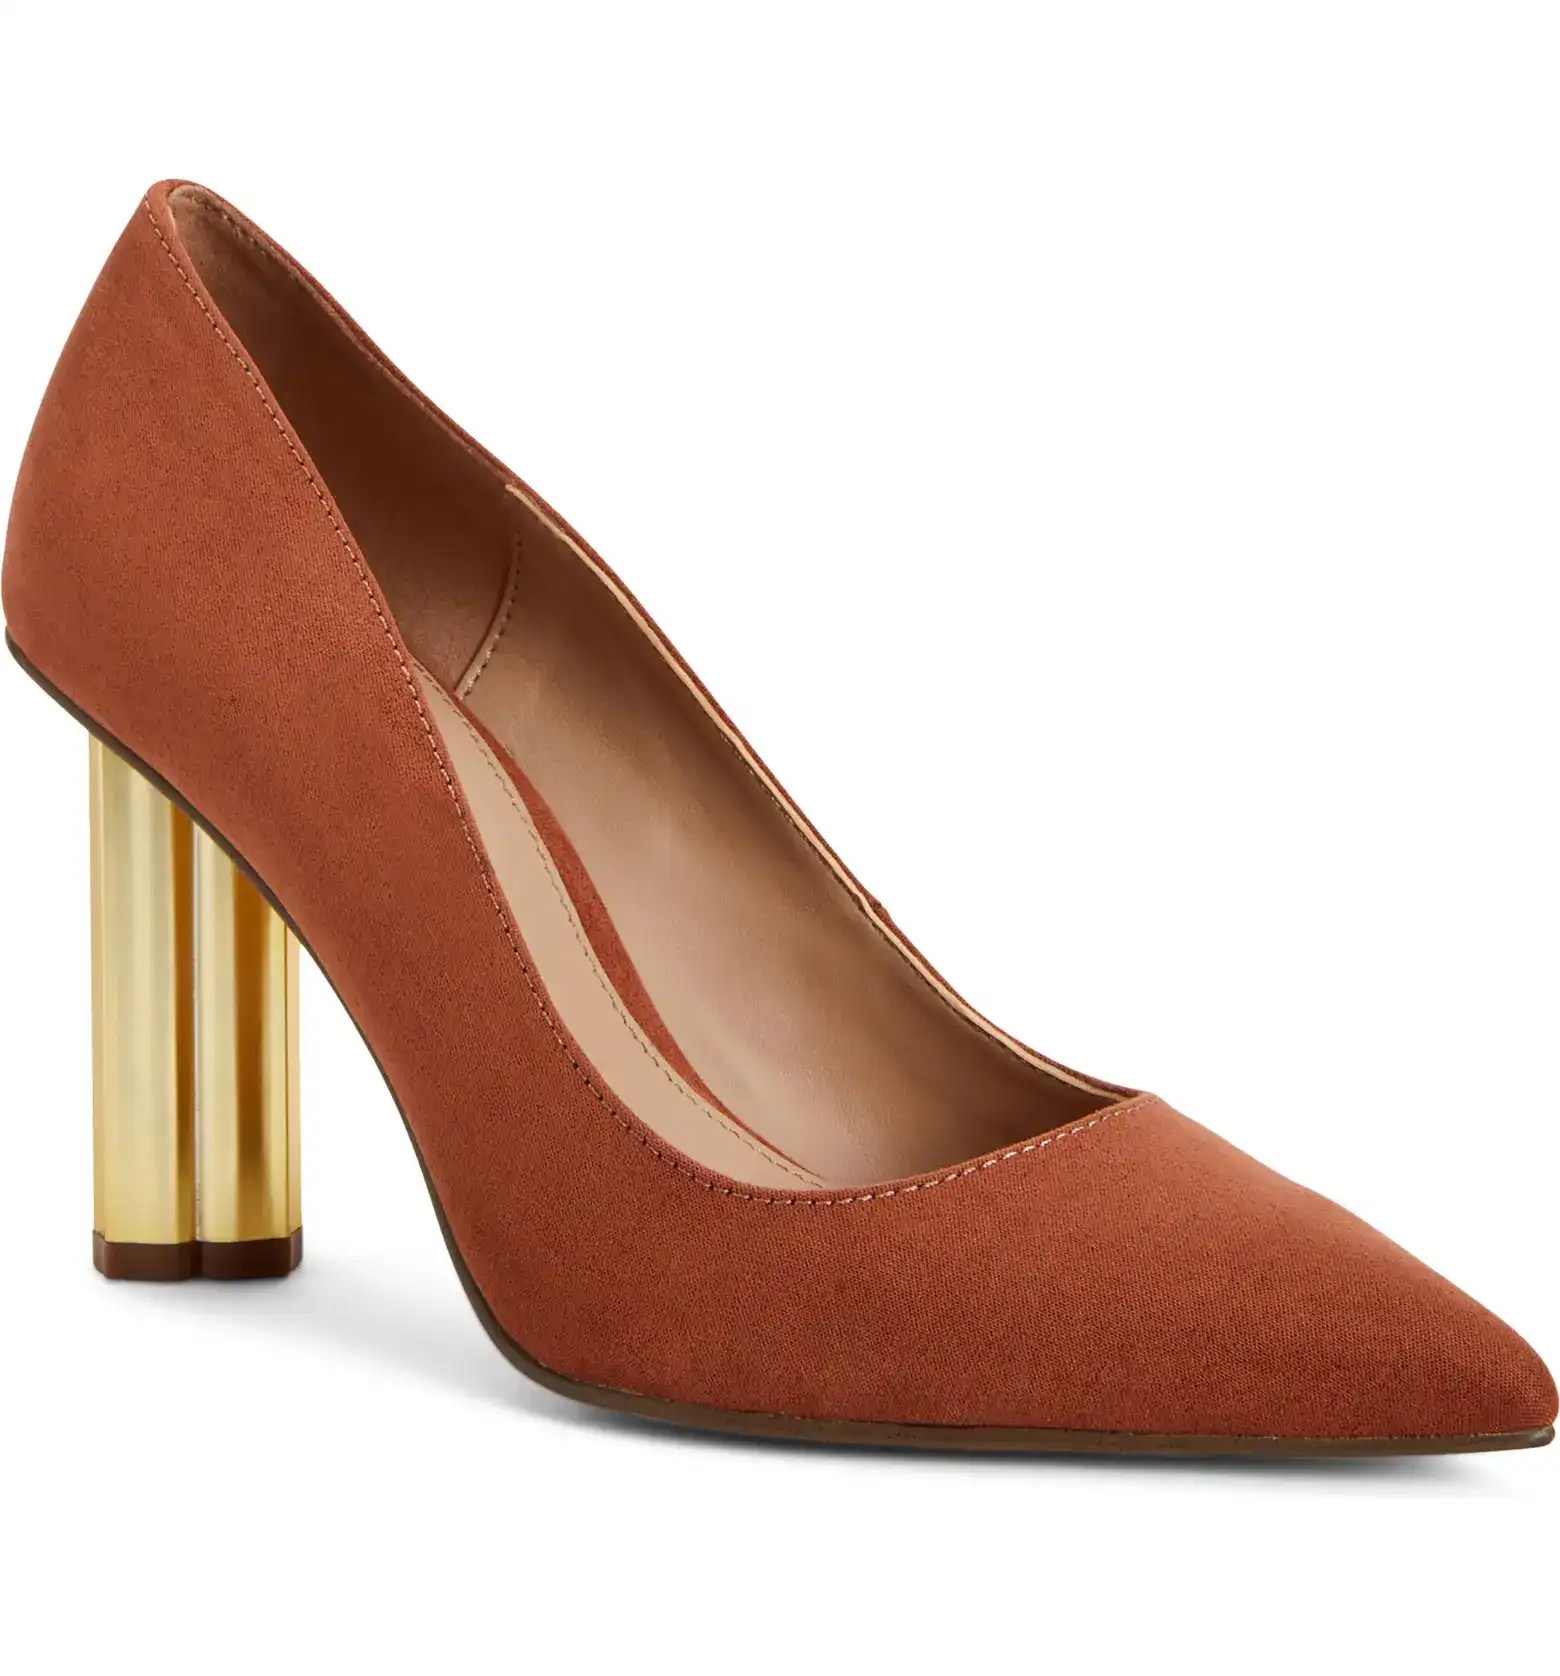 Katy Perry The Dellilah Pointed Toe Pump